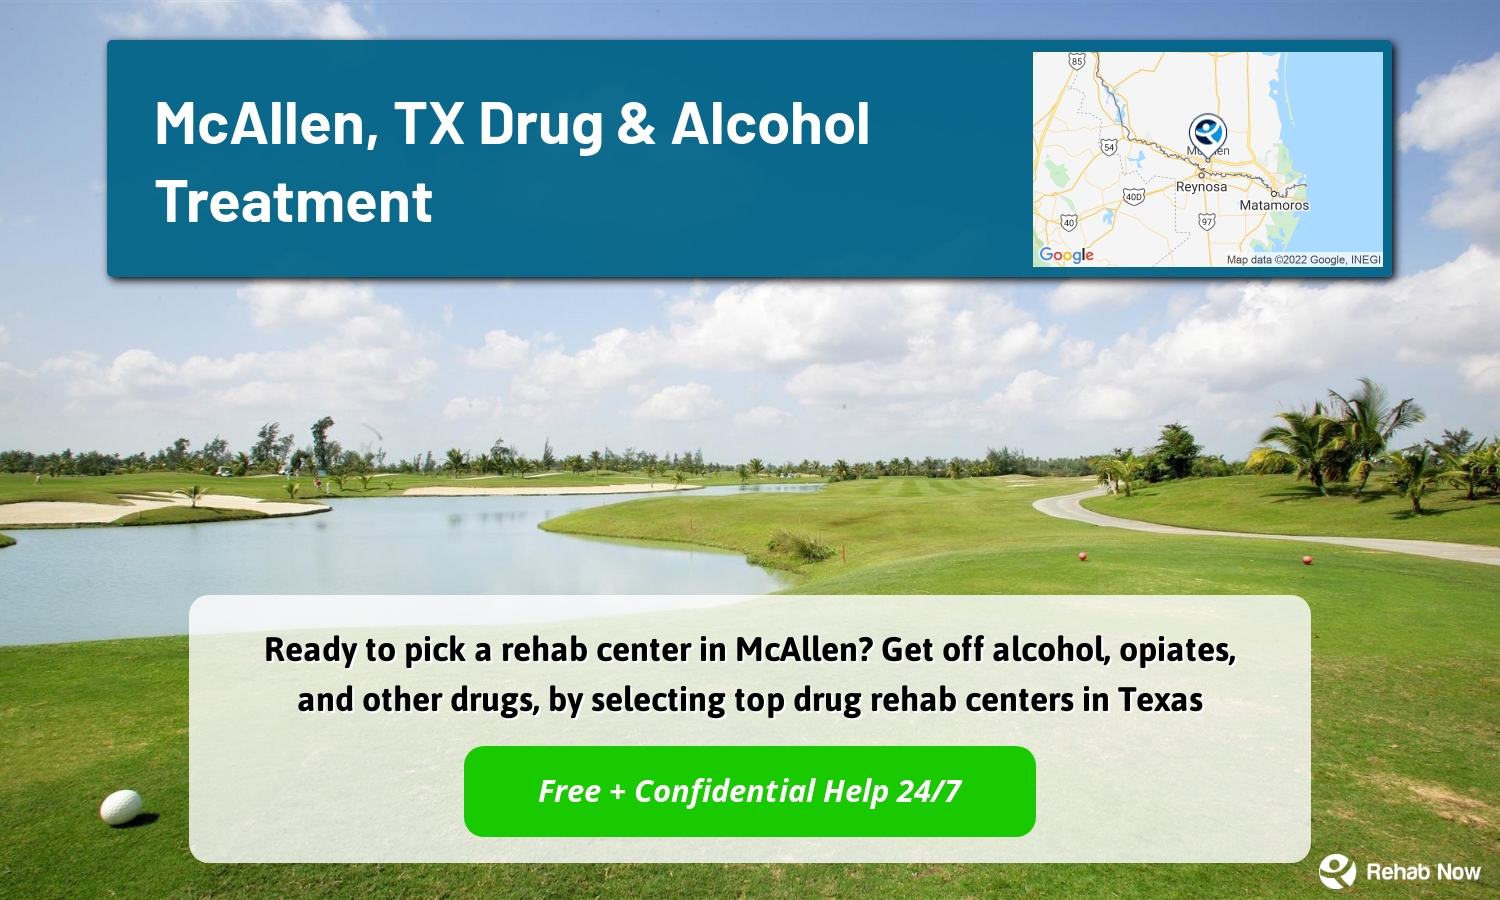 Ready to pick a rehab center in McAllen? Get off alcohol, opiates, and other drugs, by selecting top drug rehab centers in Texas